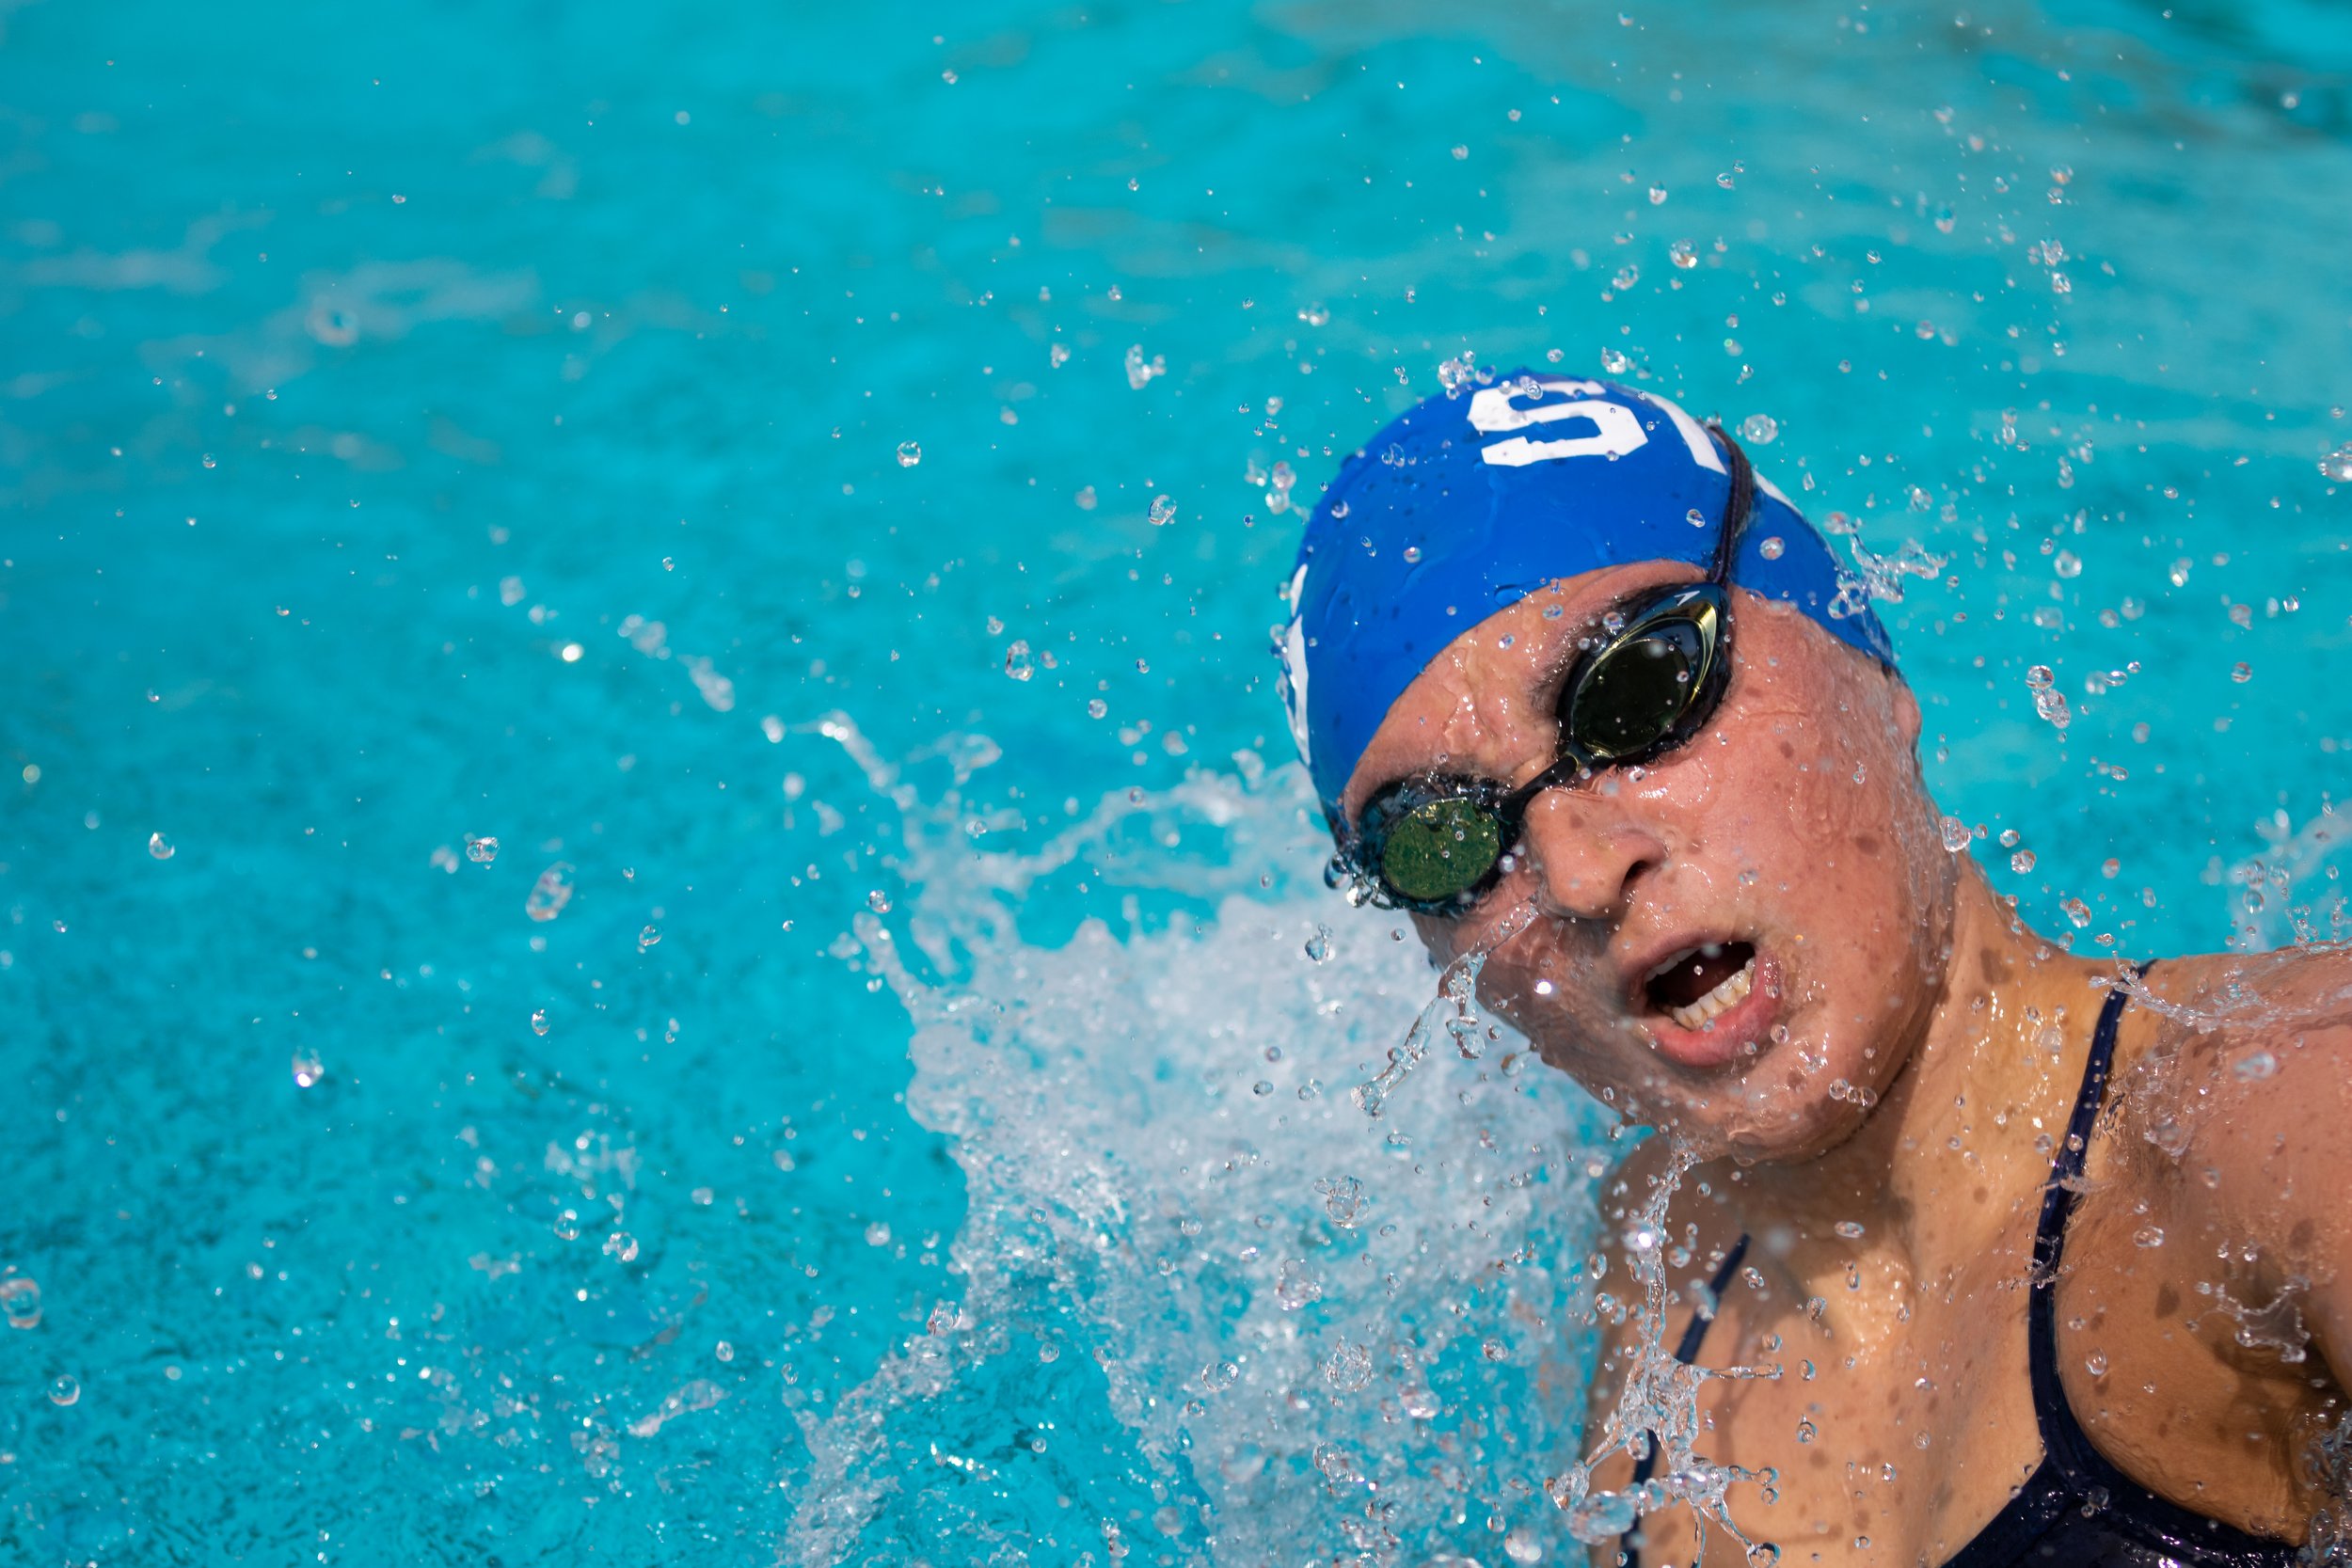  Santa Monica College Corsair Ema Kilmauskas swimming the Women's 200 Yard Butterfly during the second Western State Conference at Los Angeles Valley College, Los Angeles, Calif., on Saturday, March 18, 2023. Kilmauskas swam a time of 2:11.38. (Caylo